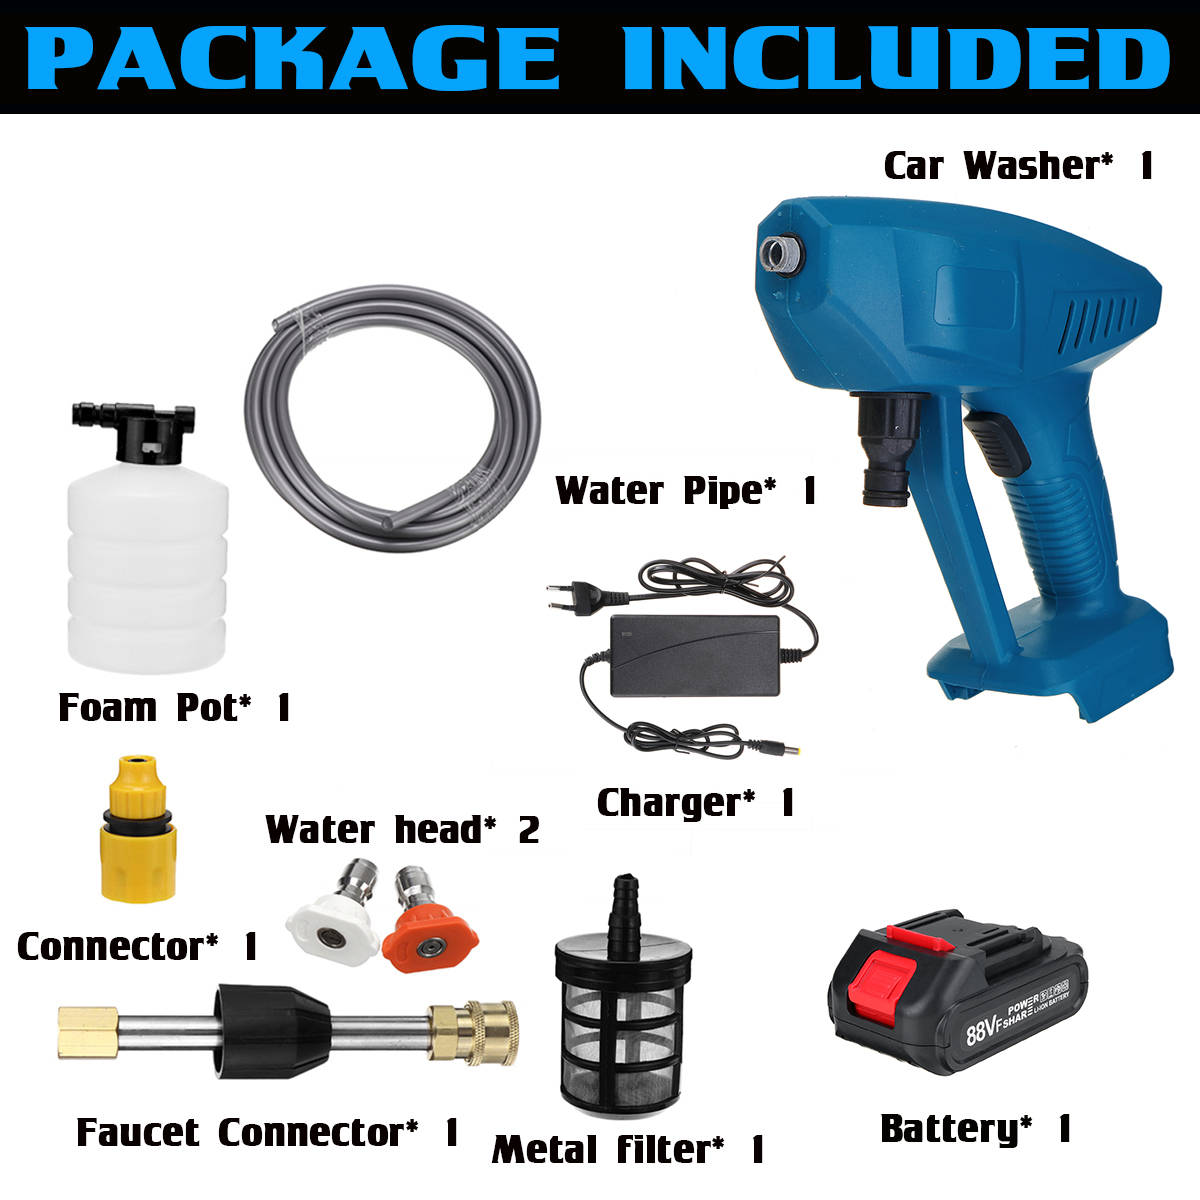 600W-Cordless-High-Pressure-Car-Power-Washer-Spray-Guns-Wand-Lance-Nozzle-Tips-Hose-Kit-W-Battery-Fo-1872419-6